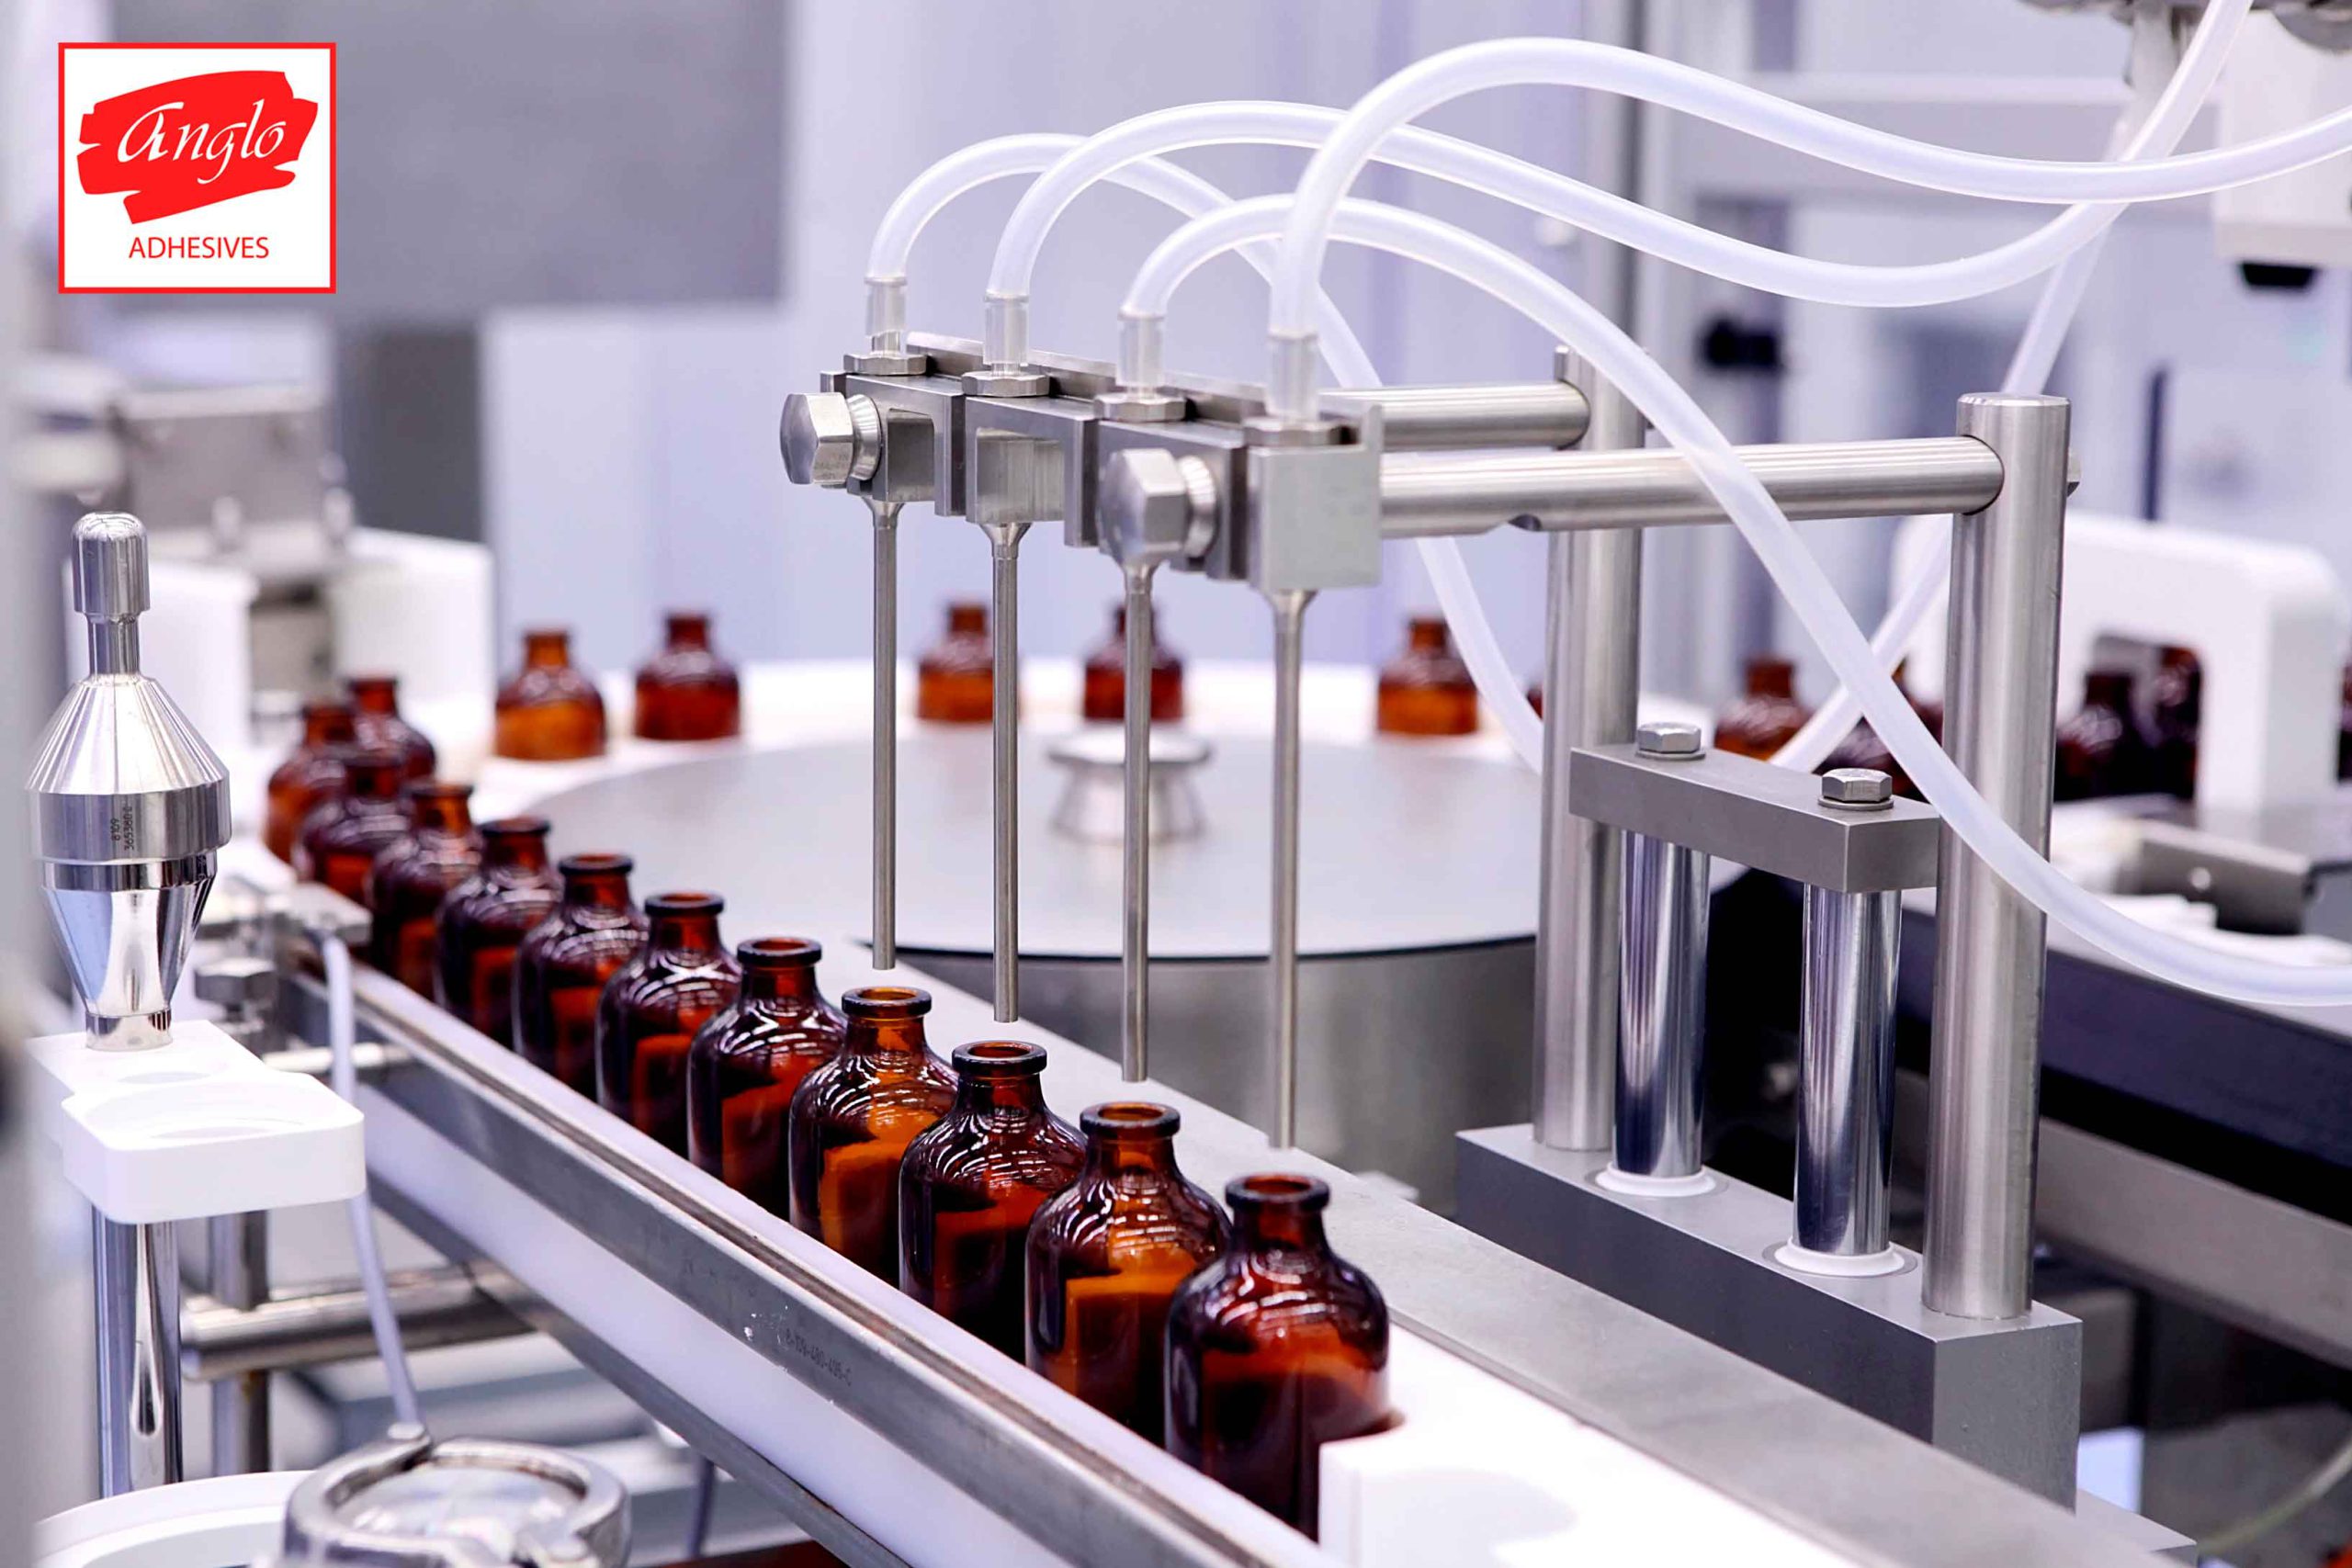 anglo-adhesives-bottling-and-packaging-of-sterile-medical-products